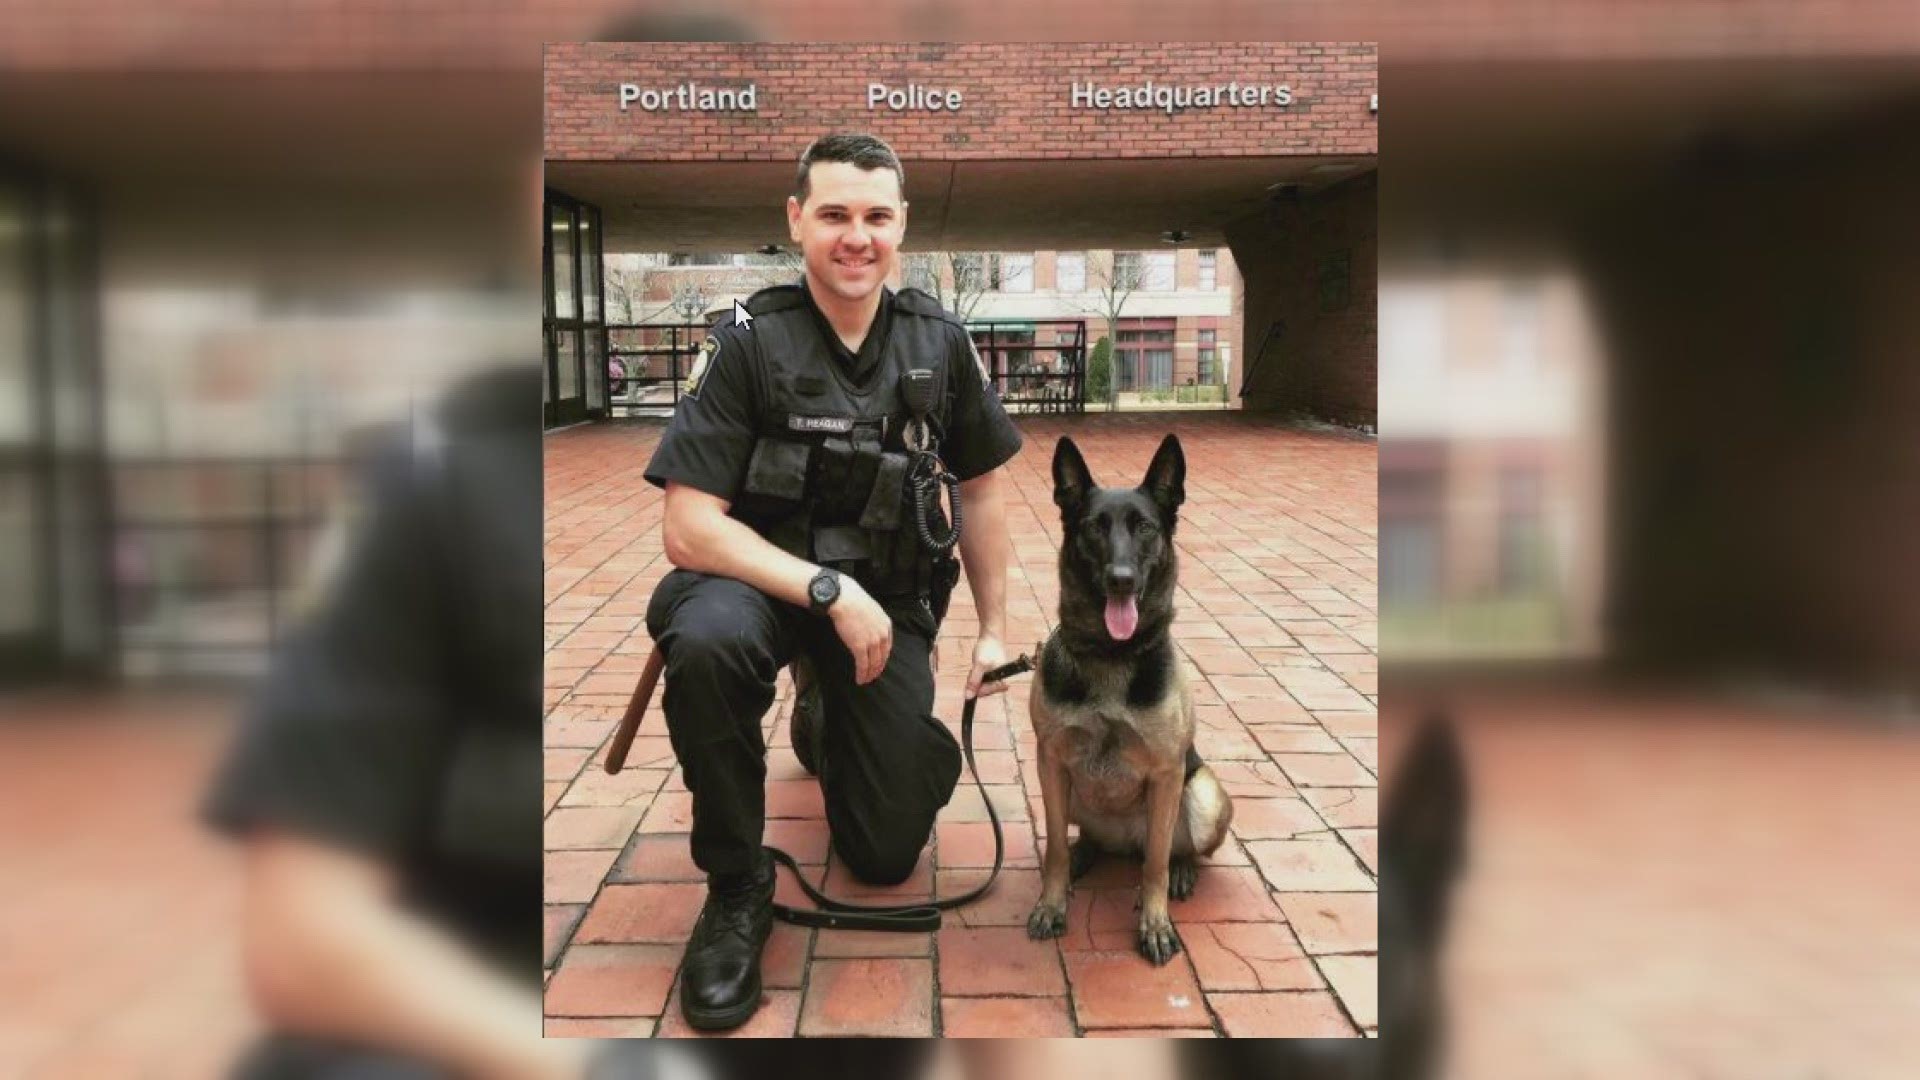 Portland Police Department honored the life of retired K-9, Trixie. She lived with her handler Officer Reagan in retirement but was diagnosed with cancer in October.